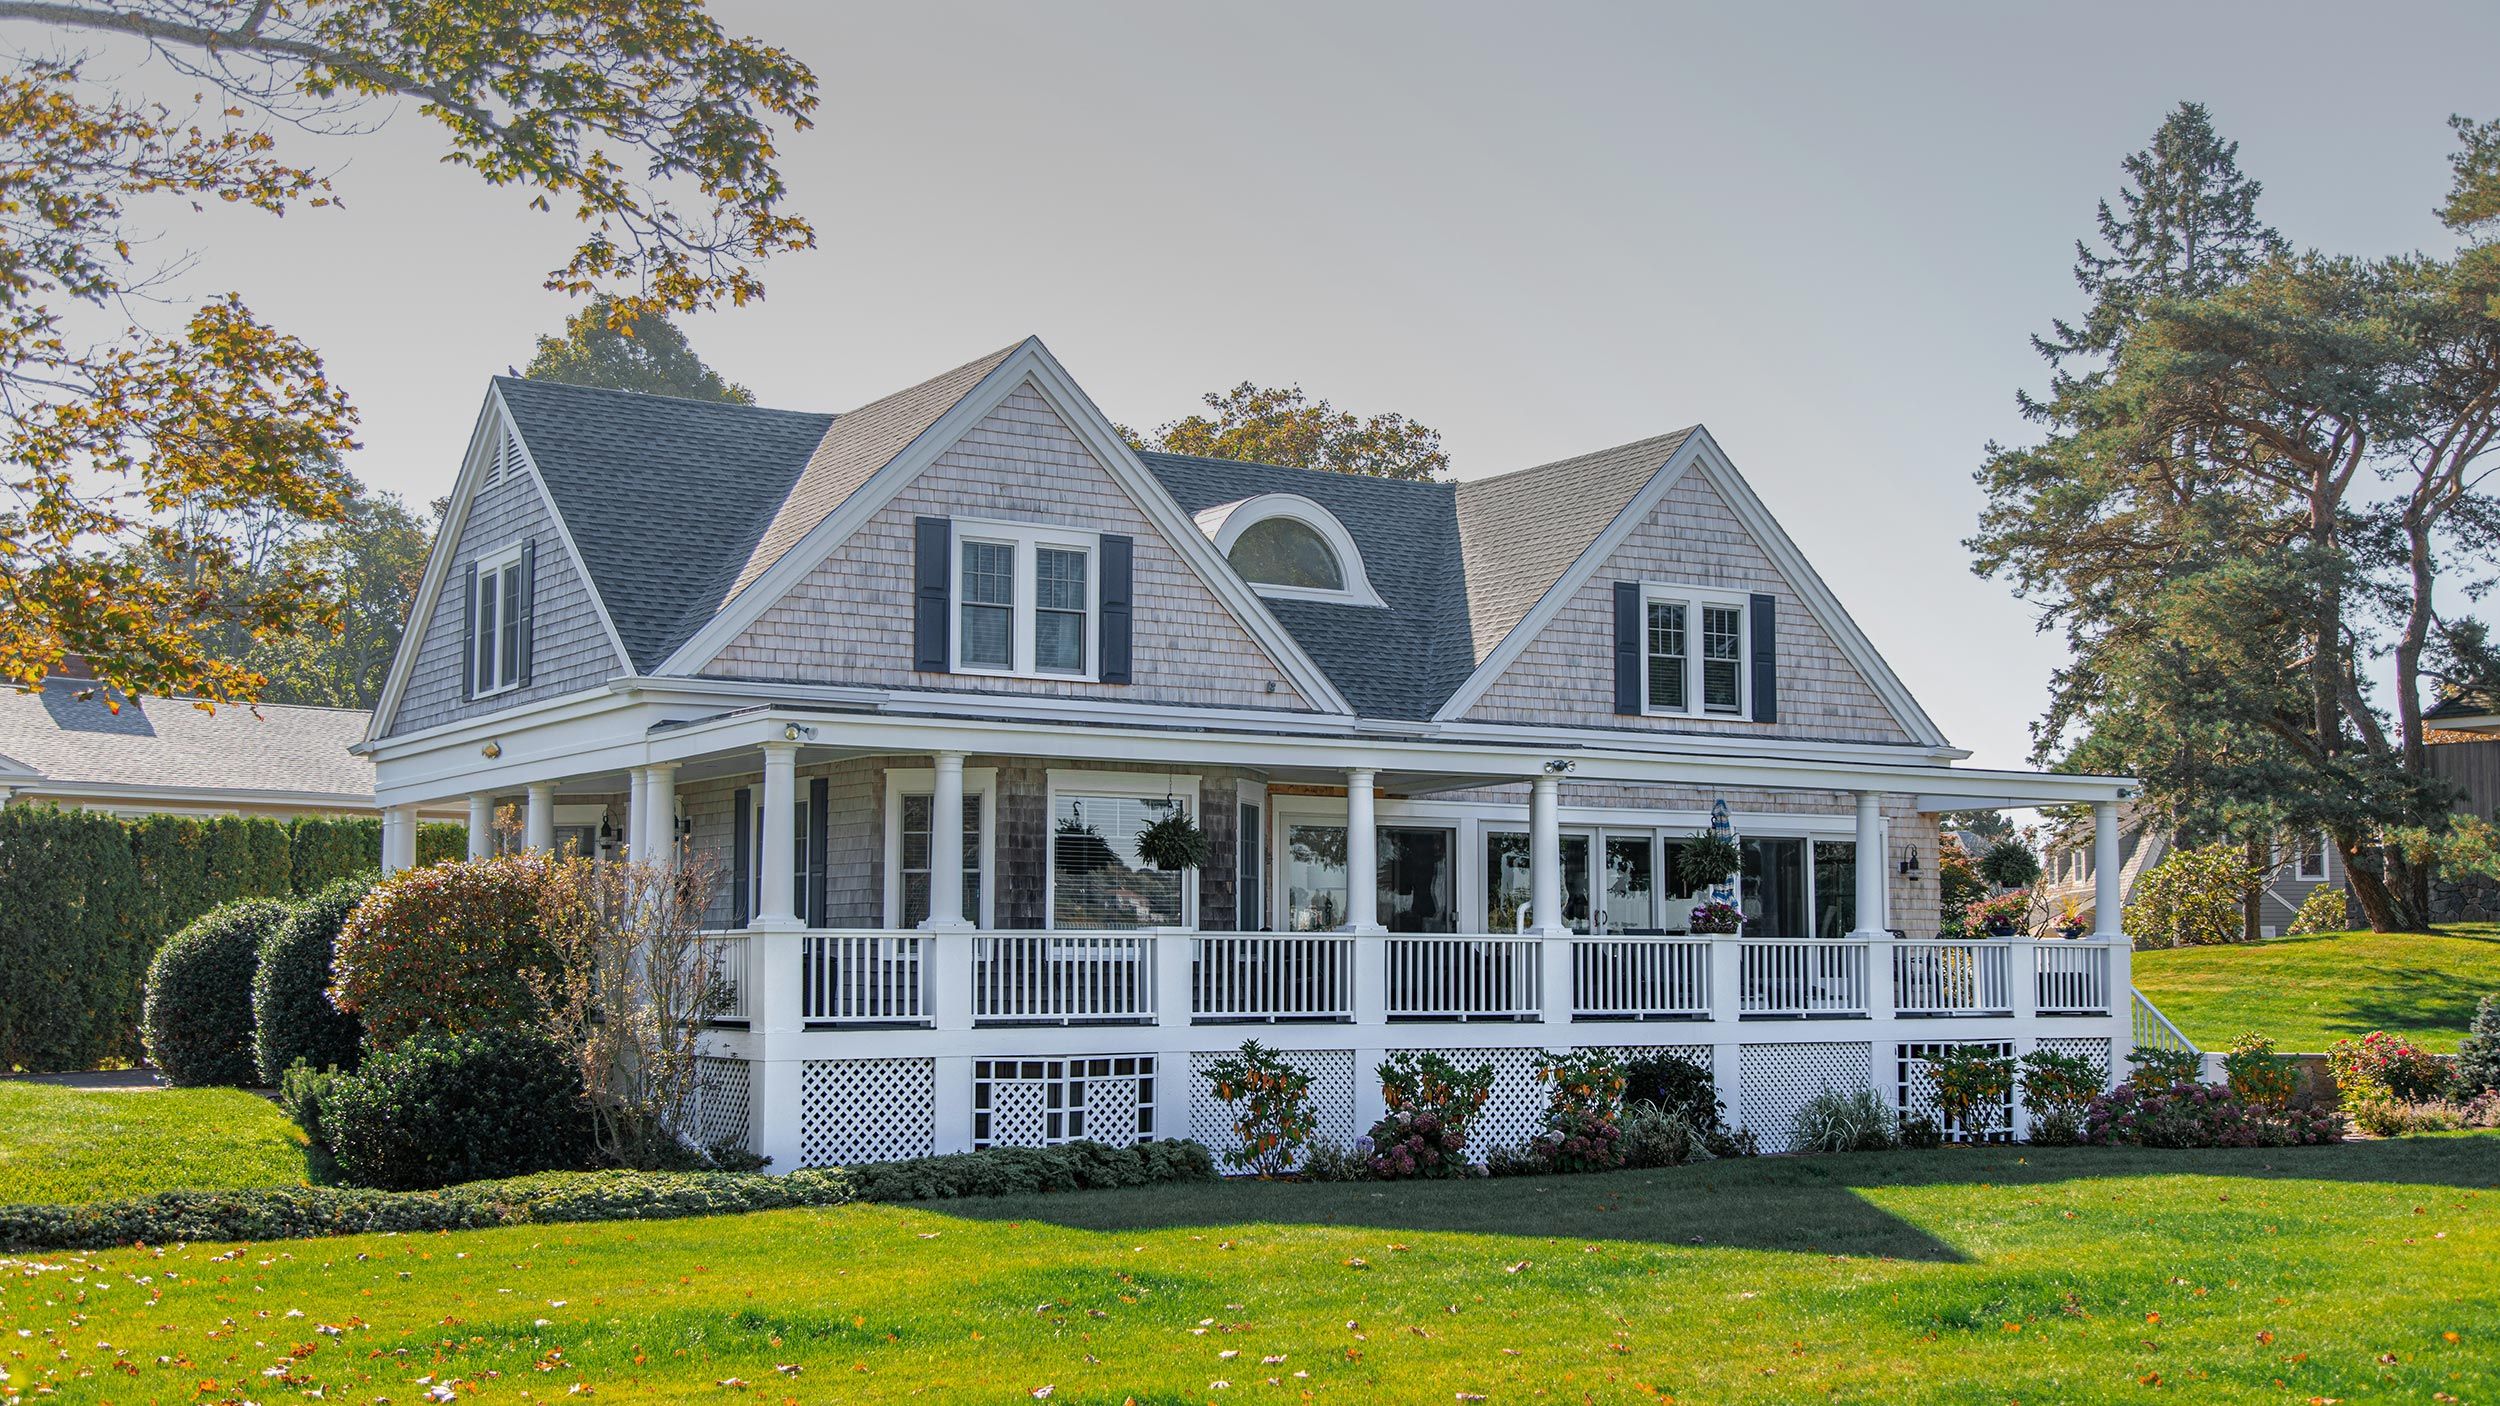 Beautiful two-story house with a wraparound porch, grey shingles, and a well-manicured lawn.